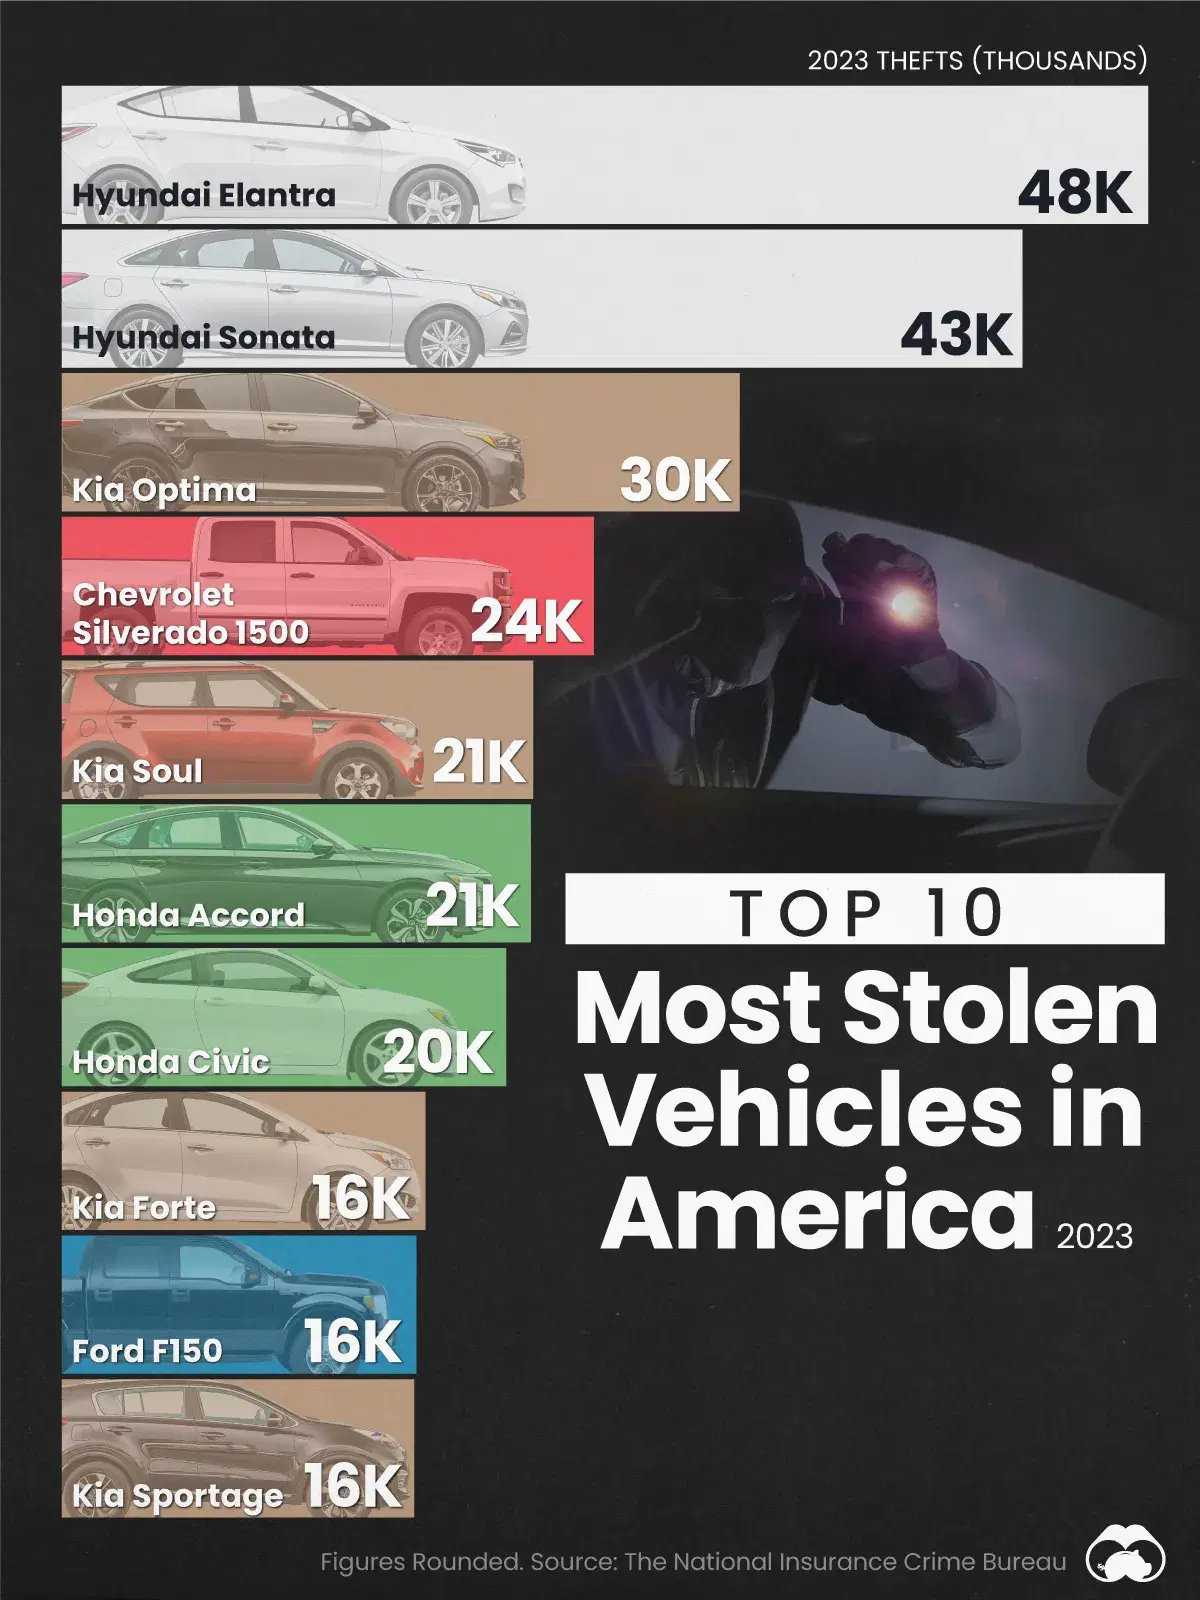 Kia and Hyundai Top the List of Most Stolen Cars in the U.S.